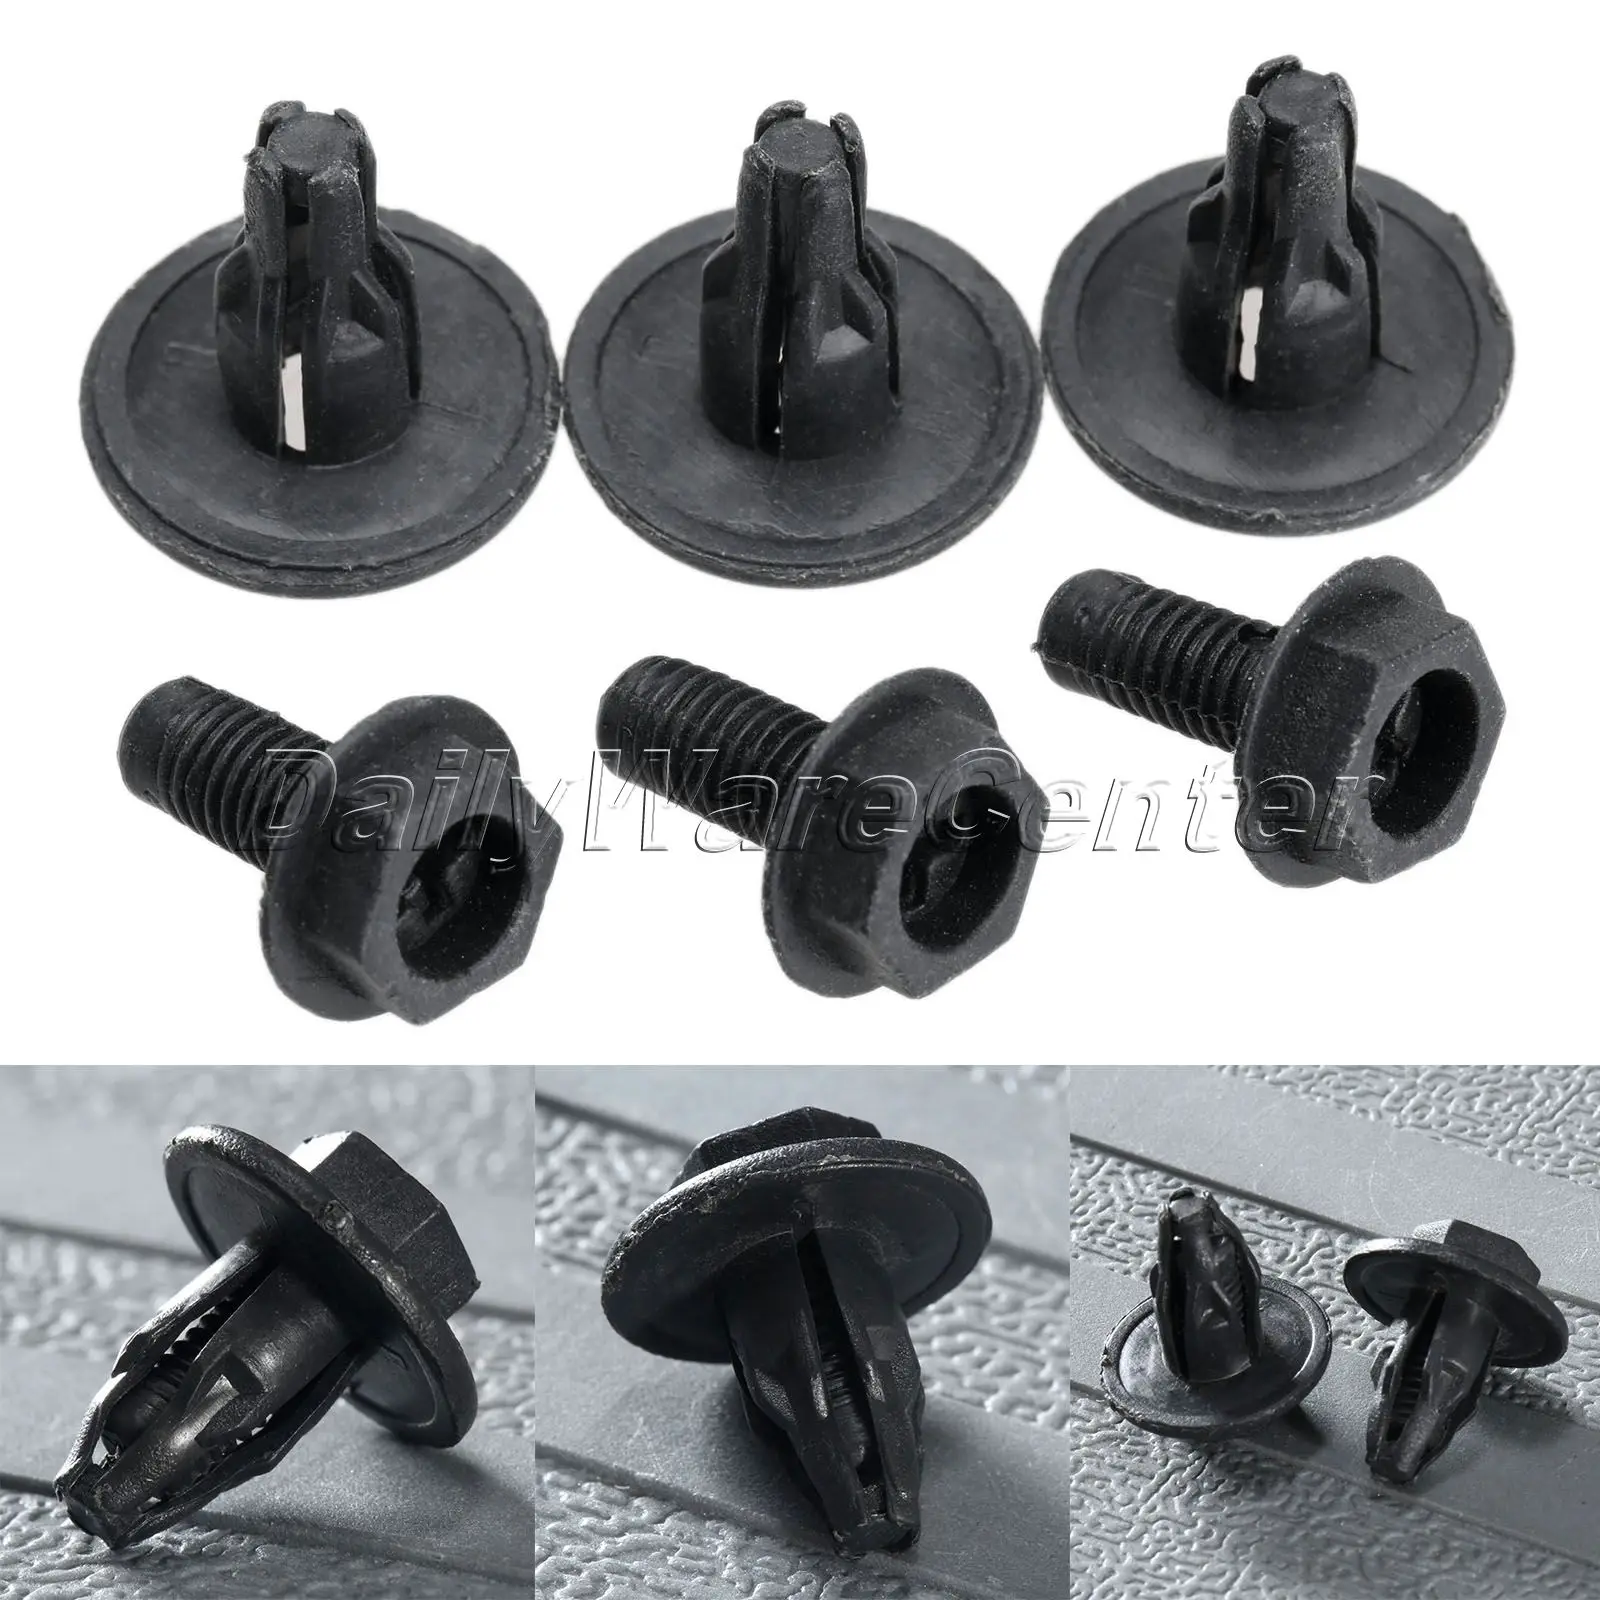 

Mgoodoo 50Pcs Car Bumper Fender Clips Plastic Rivets Fasteners For Toyota Retaining Clip Car Door Trim Panel Clips Fit 8mm Hole